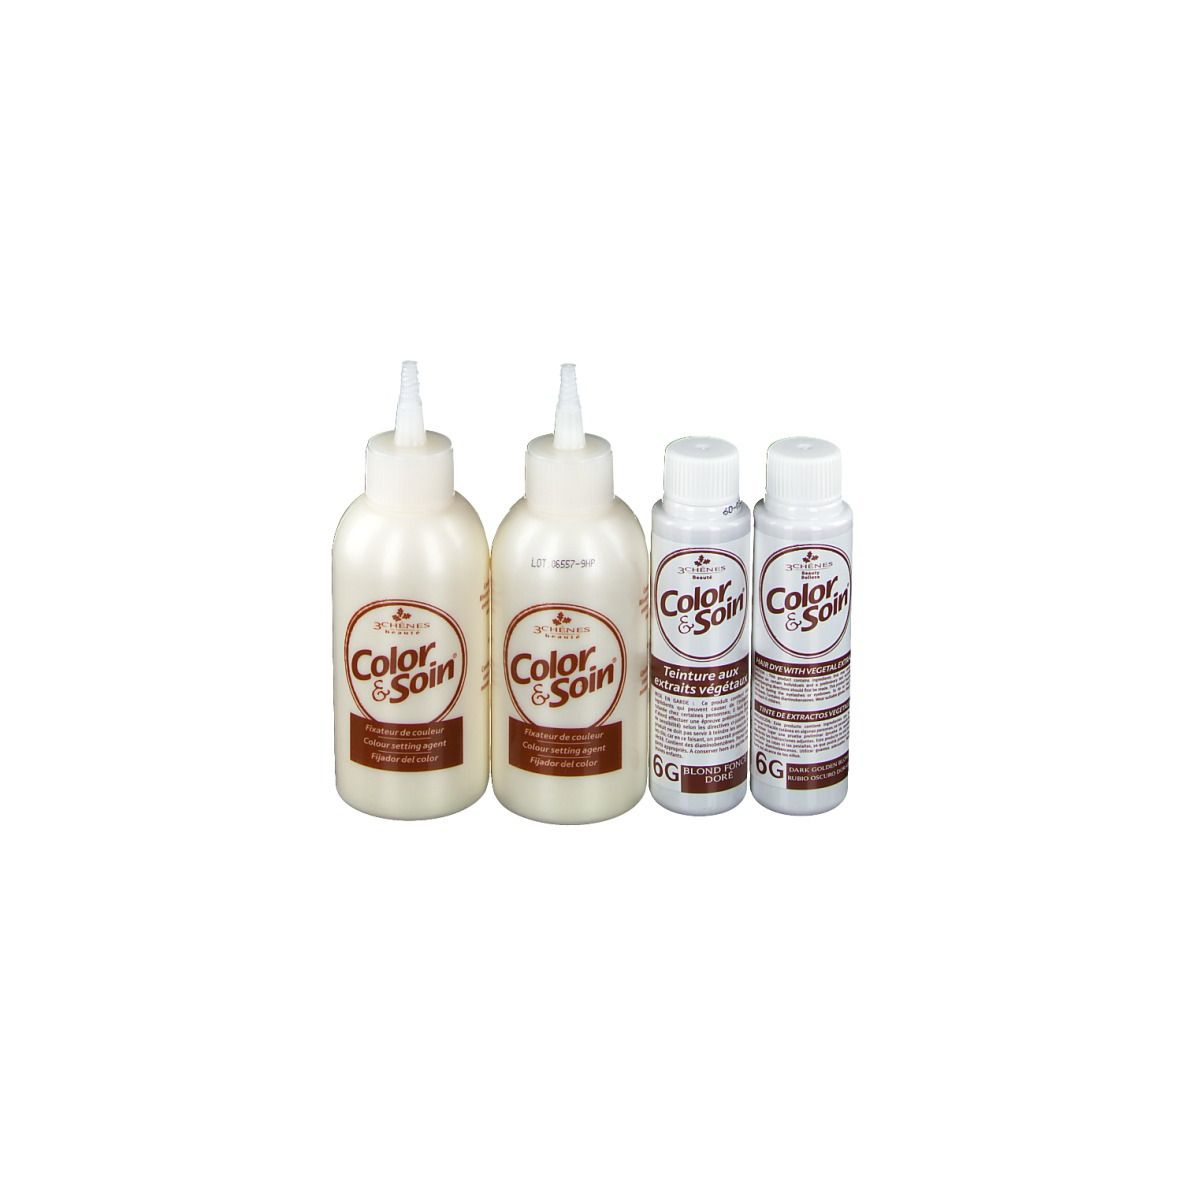 Image of Les 3 Chênes Farbe & care 6G Dunkelblondes Gold